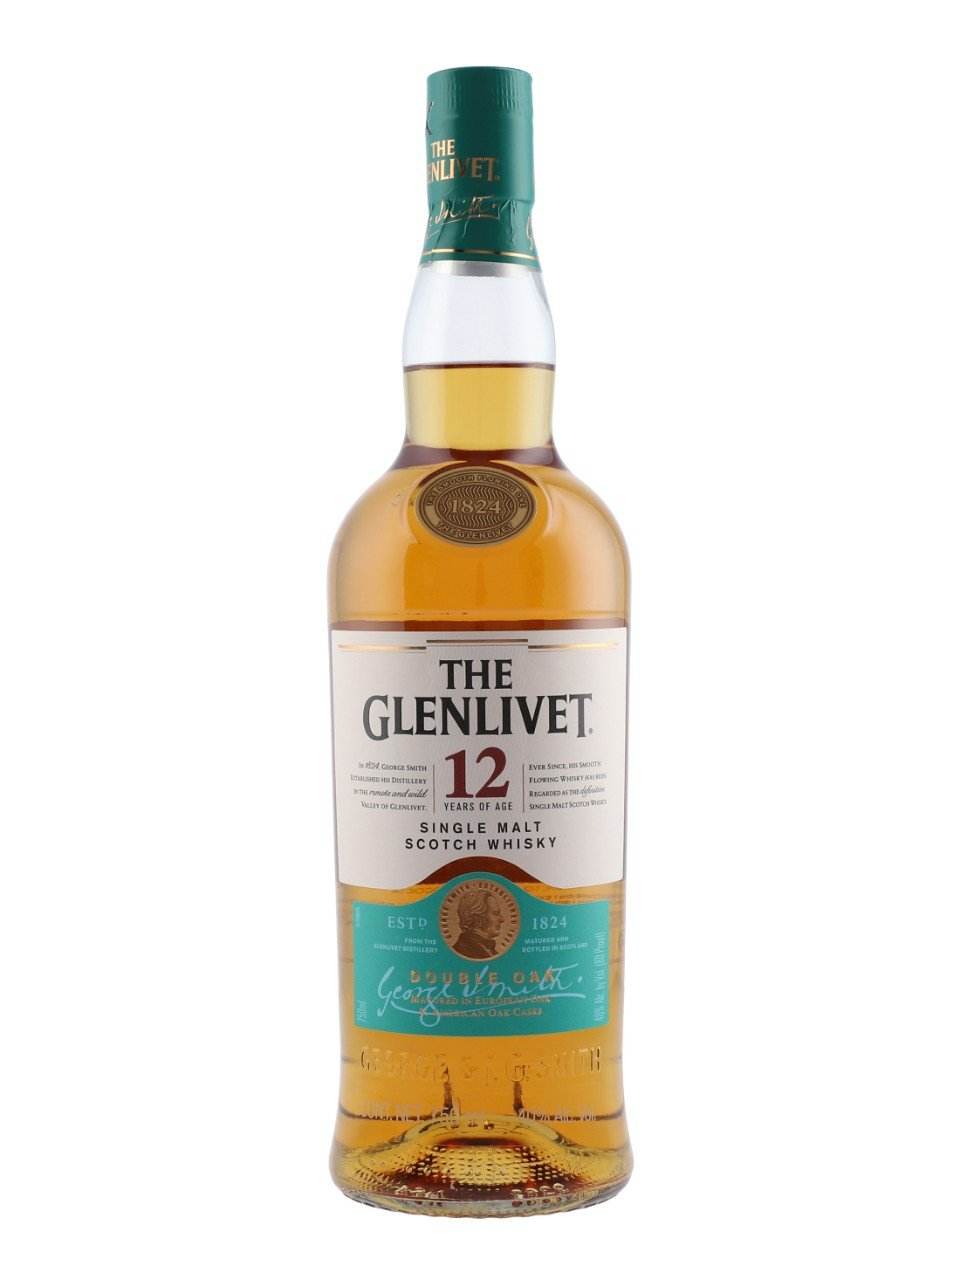 The Glenlivet 12 Year Old Single Malt Scotch Whisky | Exquisite Wine & Alcohol Gift Delivery Toronto Canada | Vyno